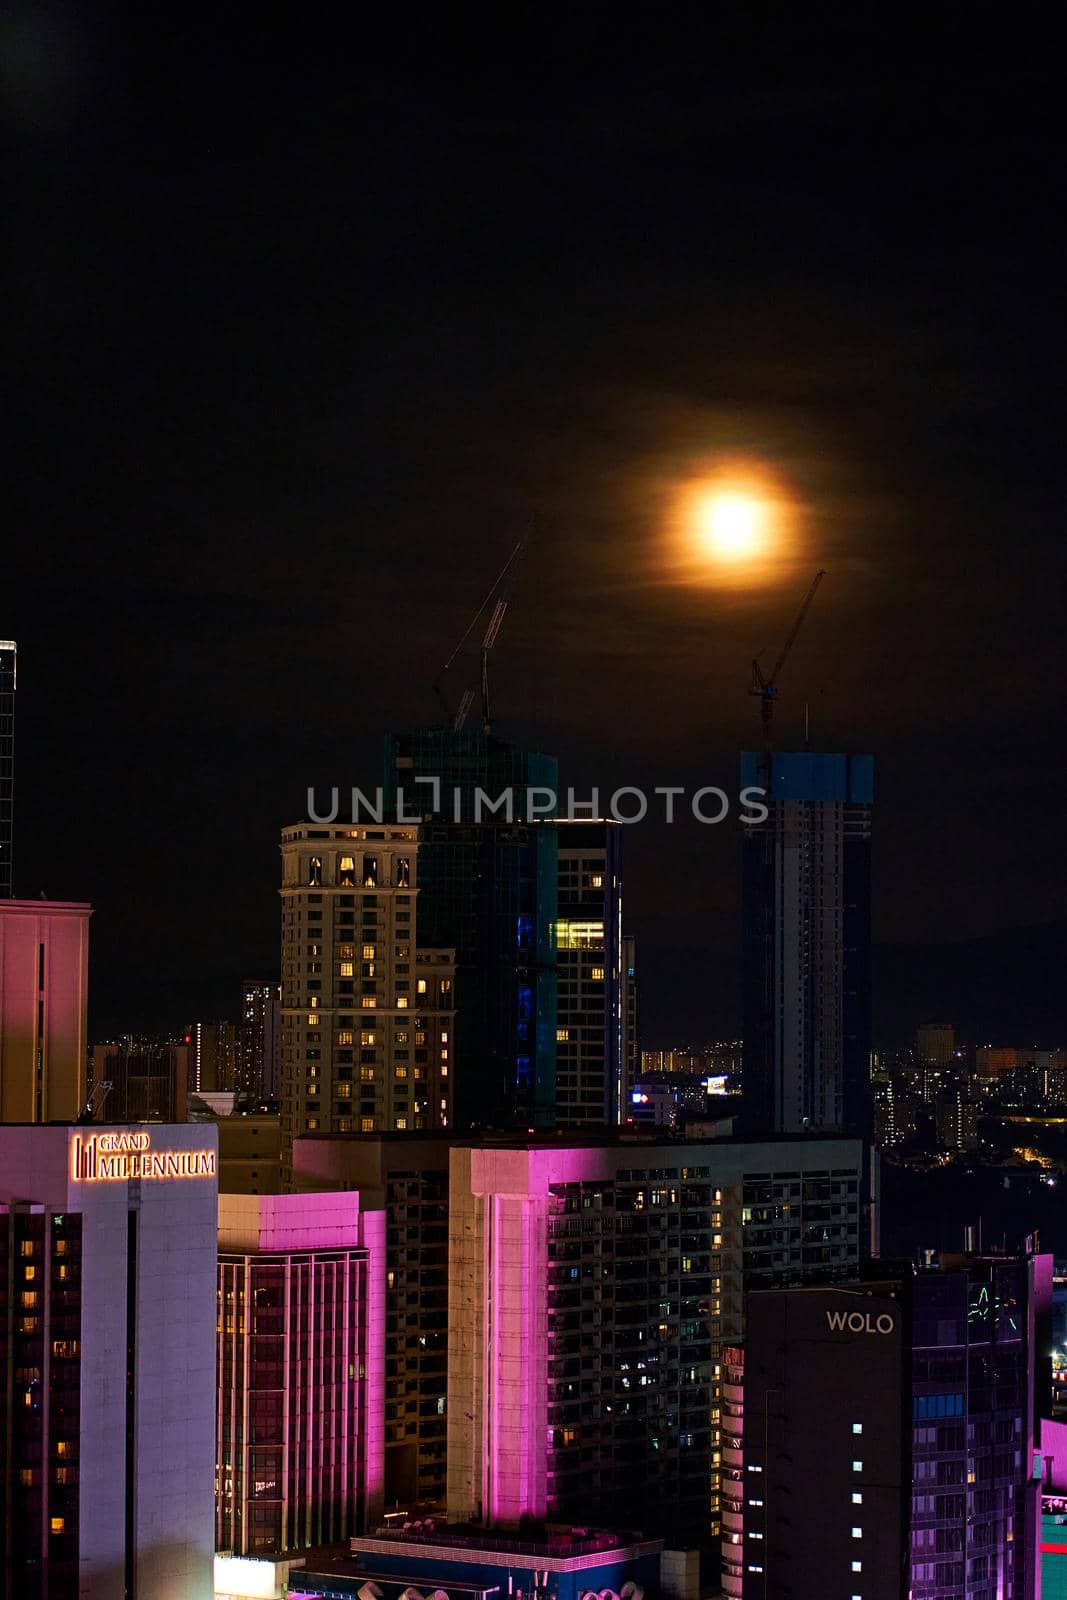 Bright full moon in the night sky over the metropolis.